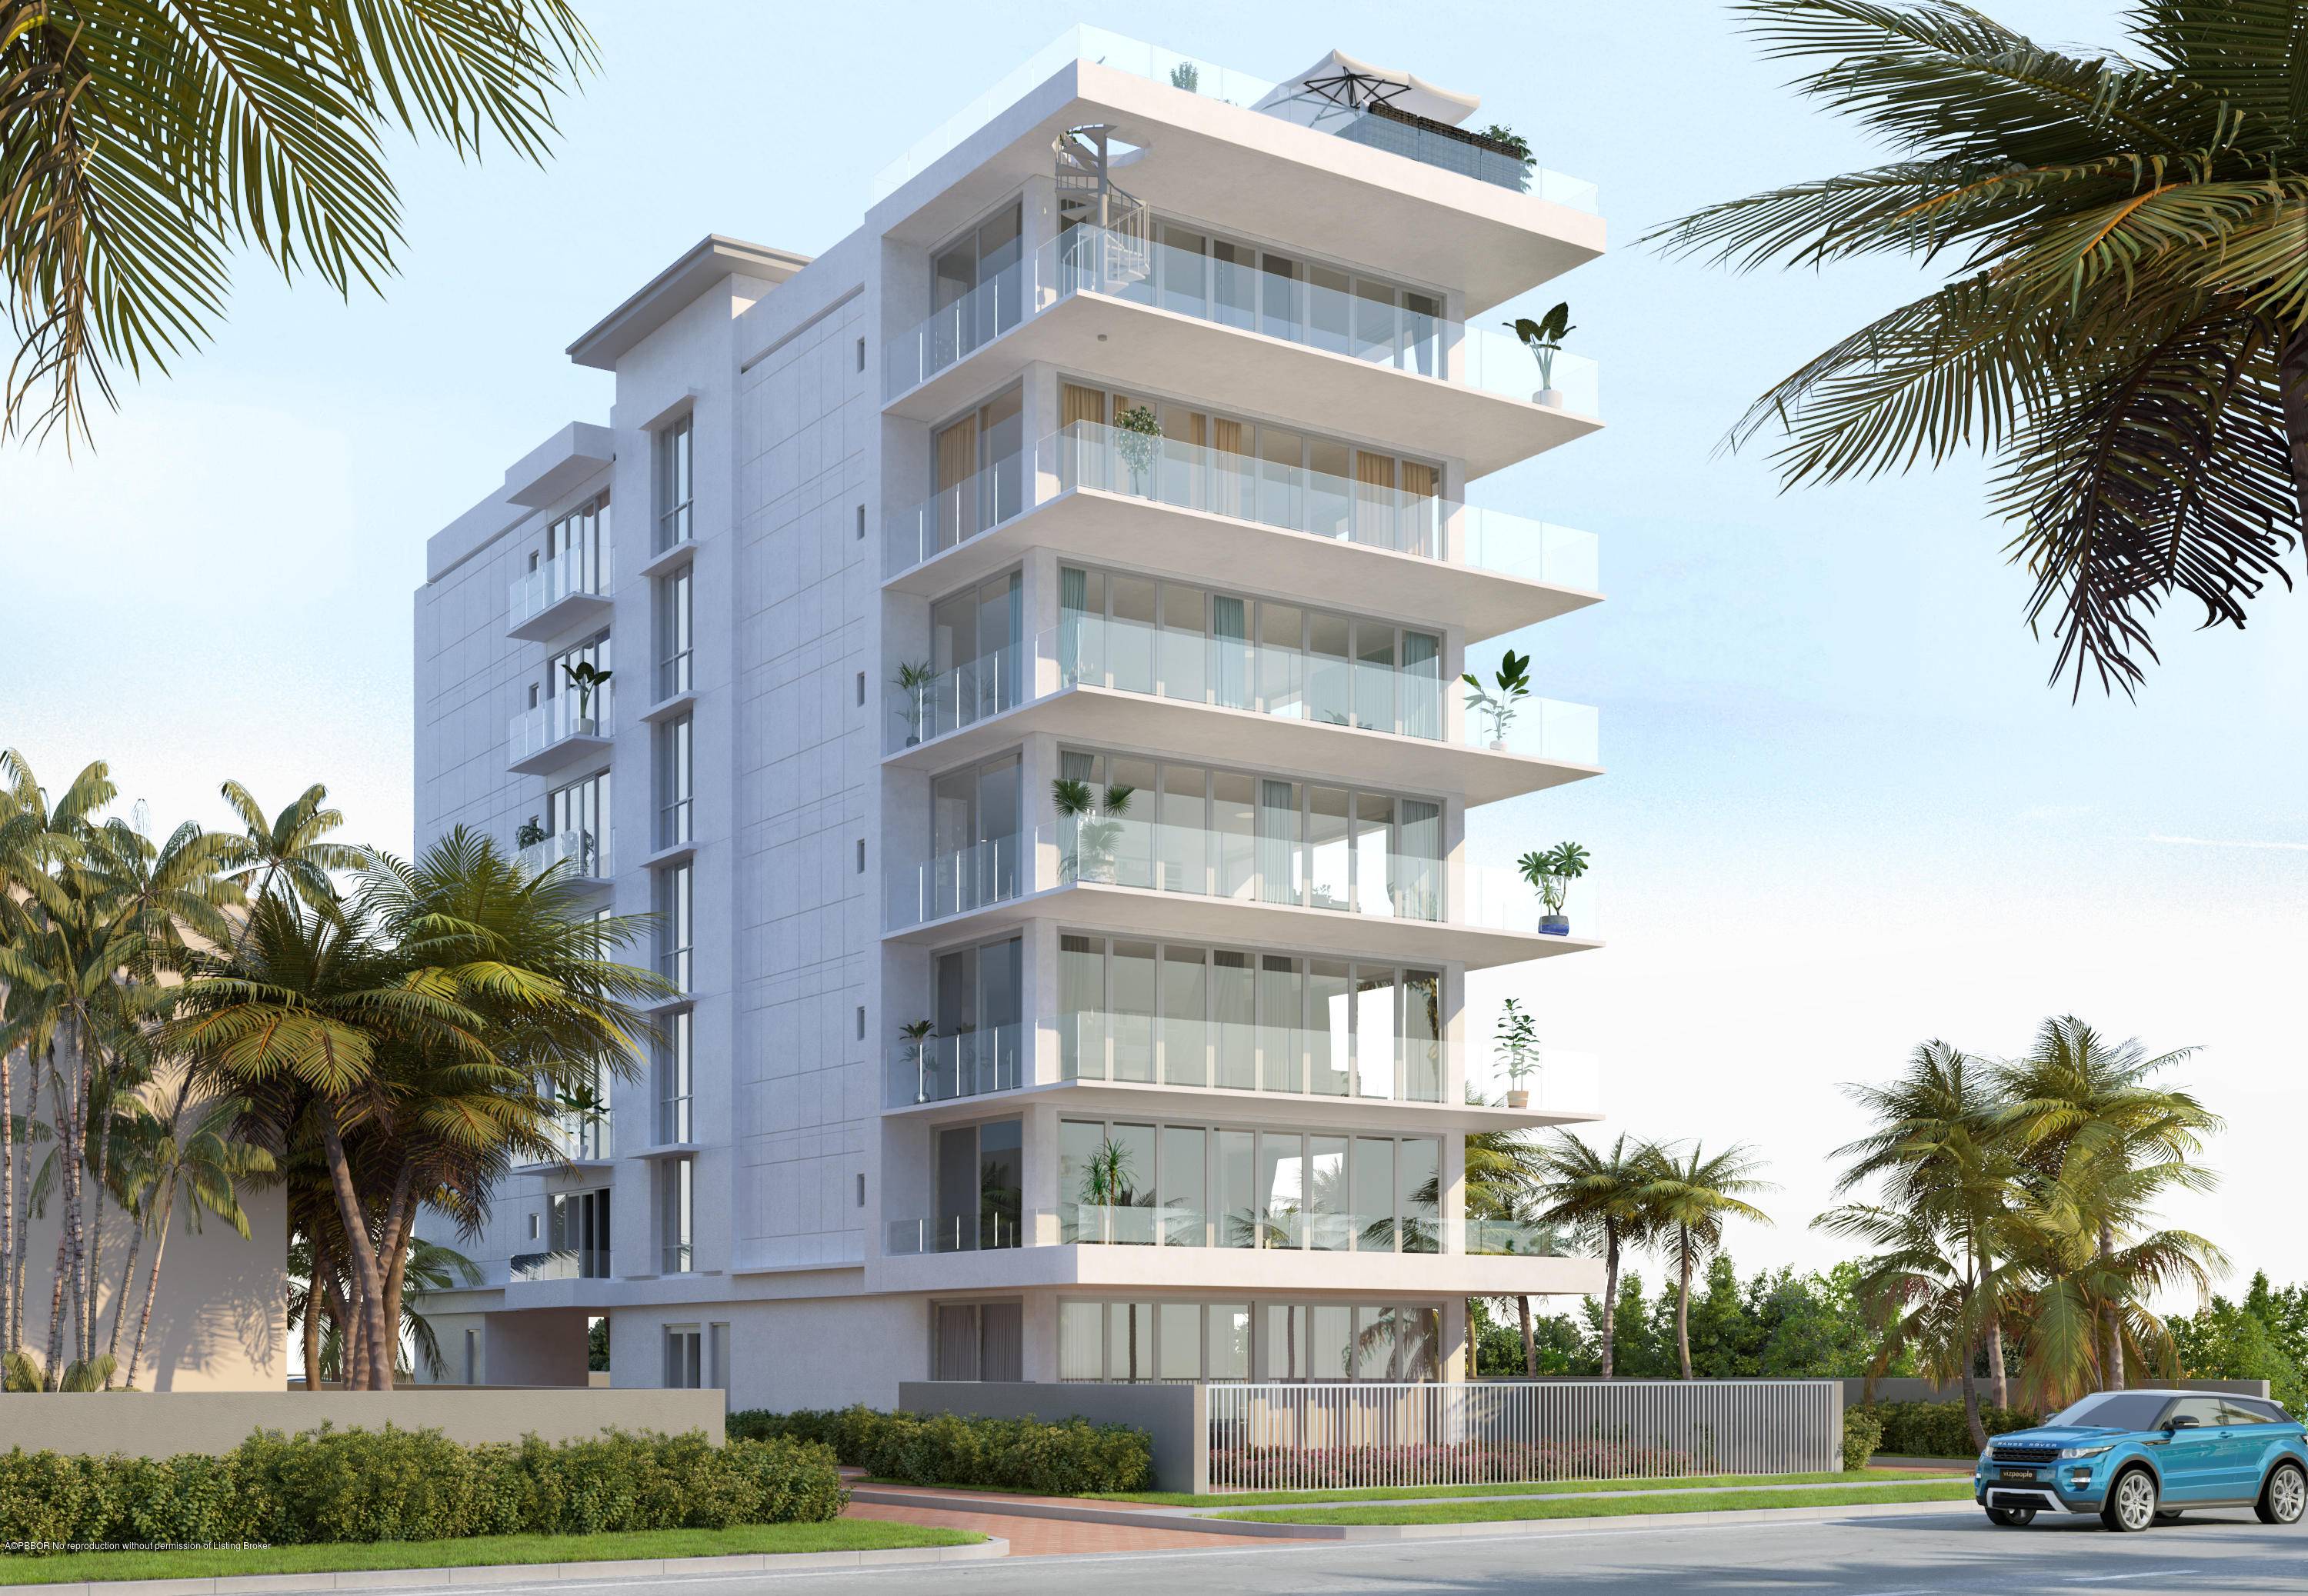 Introducing The Crystal, West Palm Beach's Newest Luxury Waterfront Boutique Condominium.